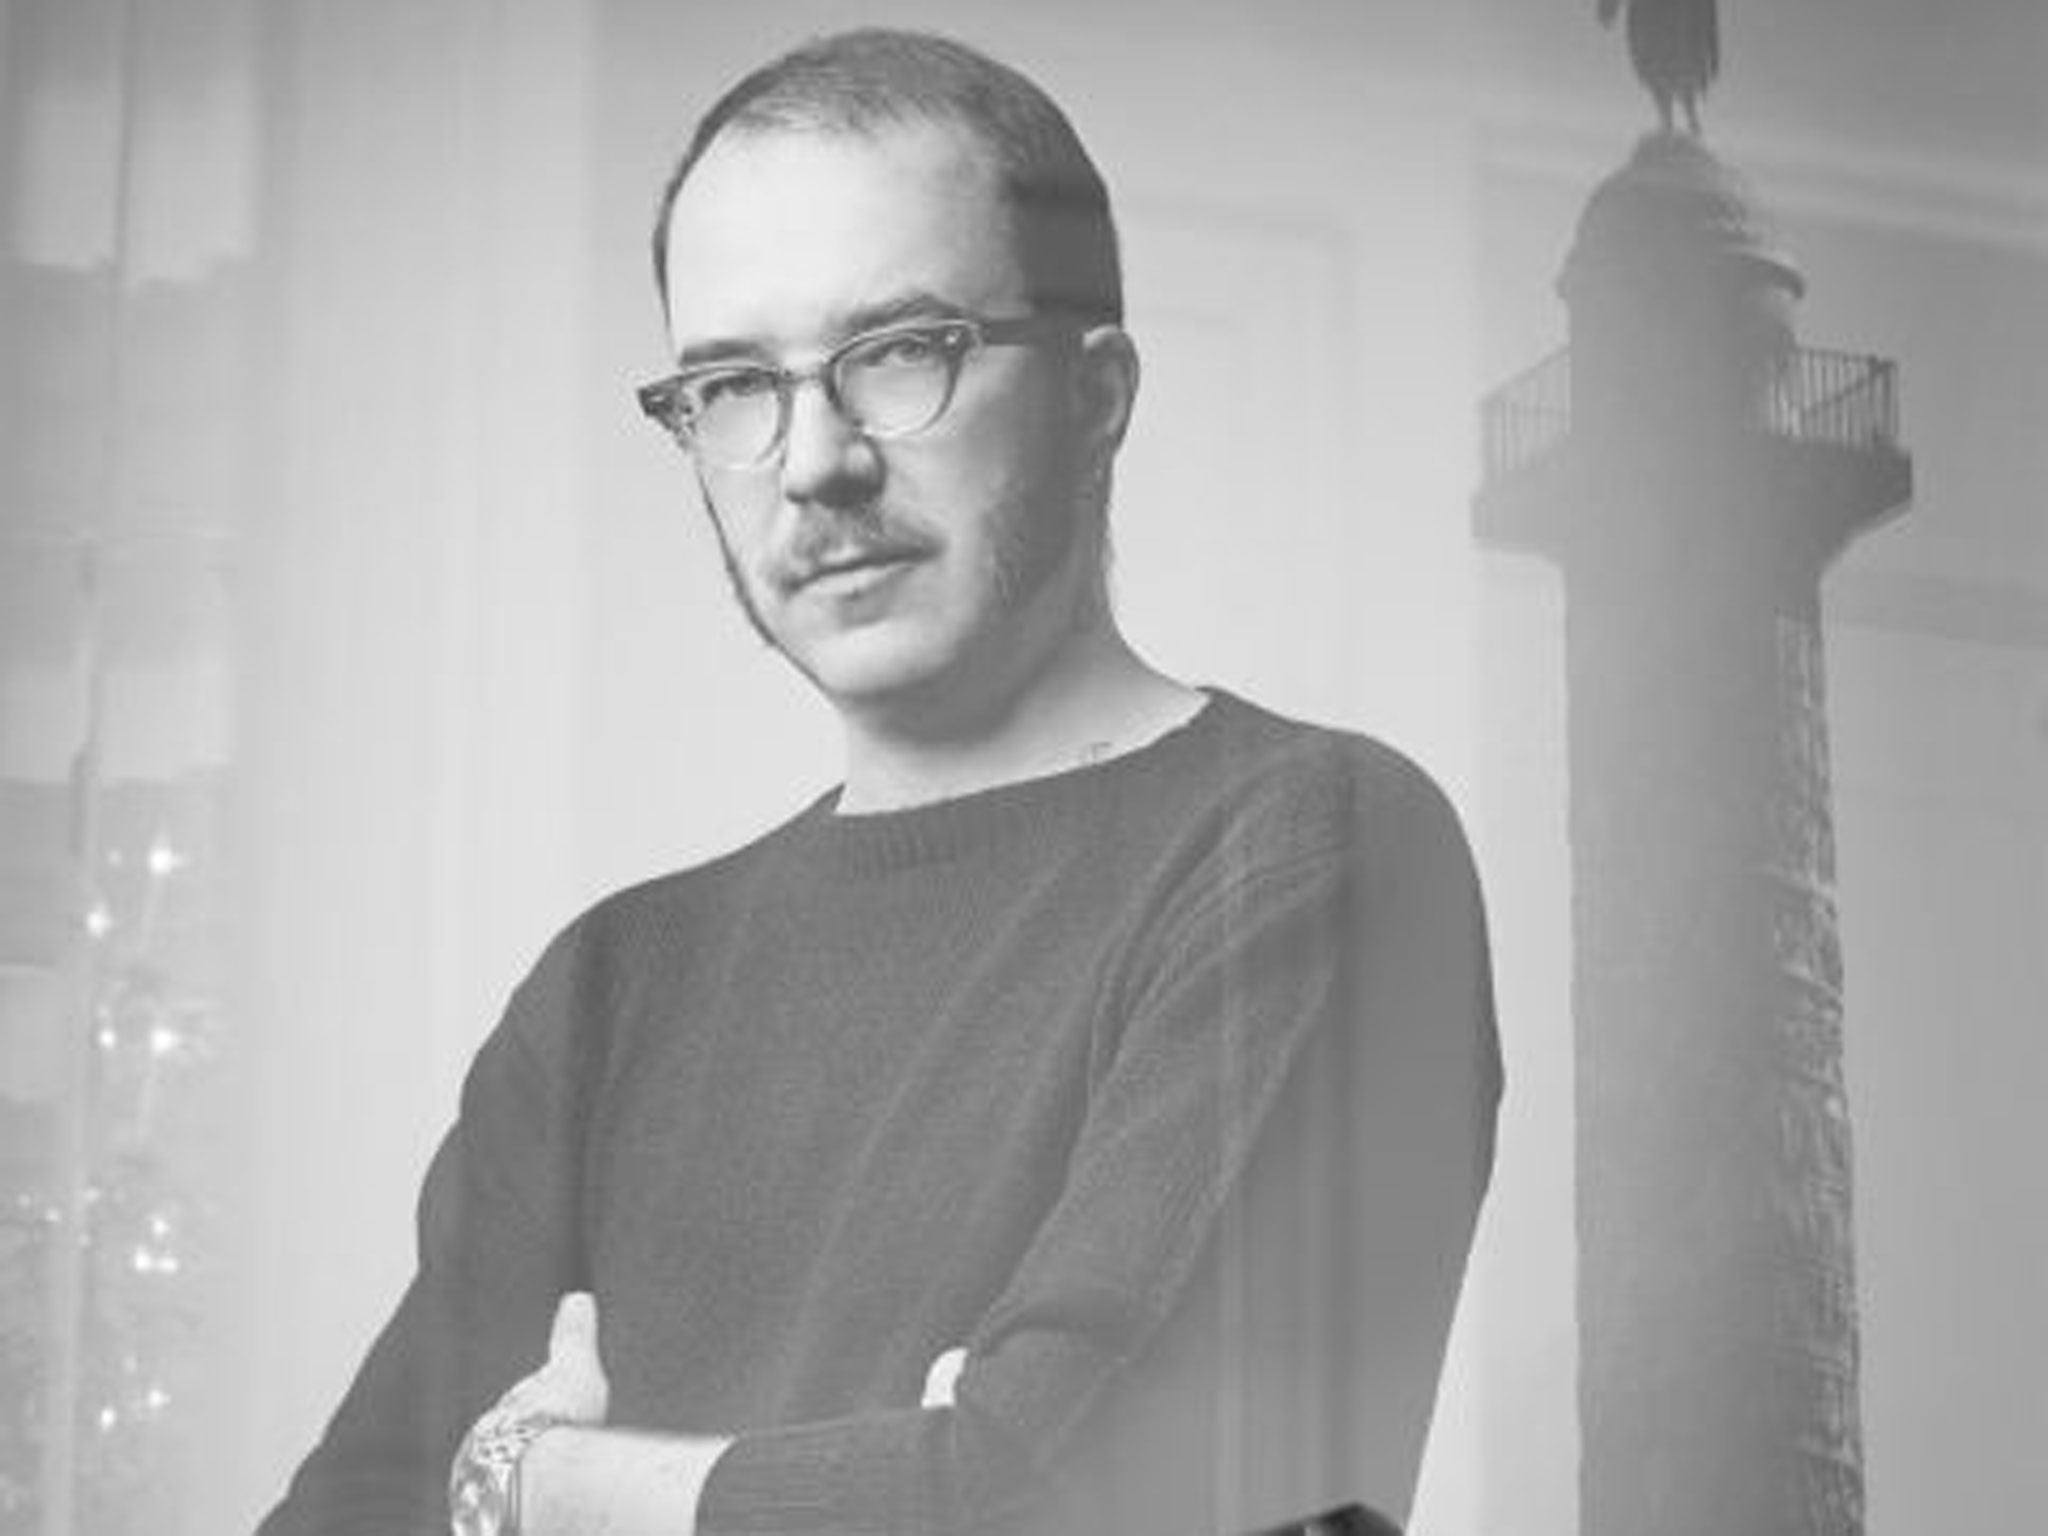 No slouch: Newly appointed creative director Marco Zanini